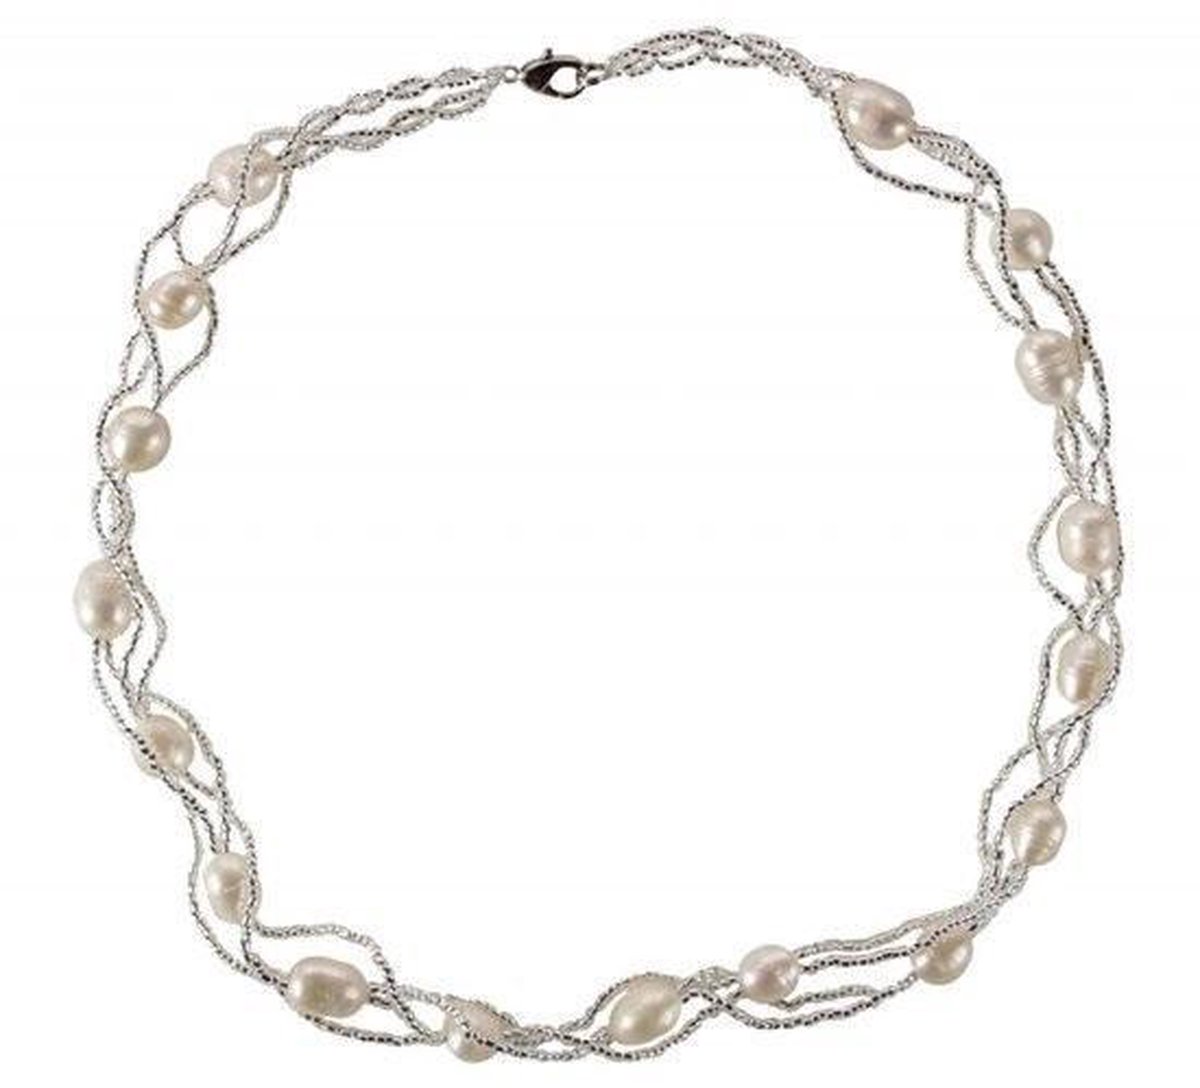 Zoetwater parel ketting Twine Pearl White - echte parels - wit - zilver